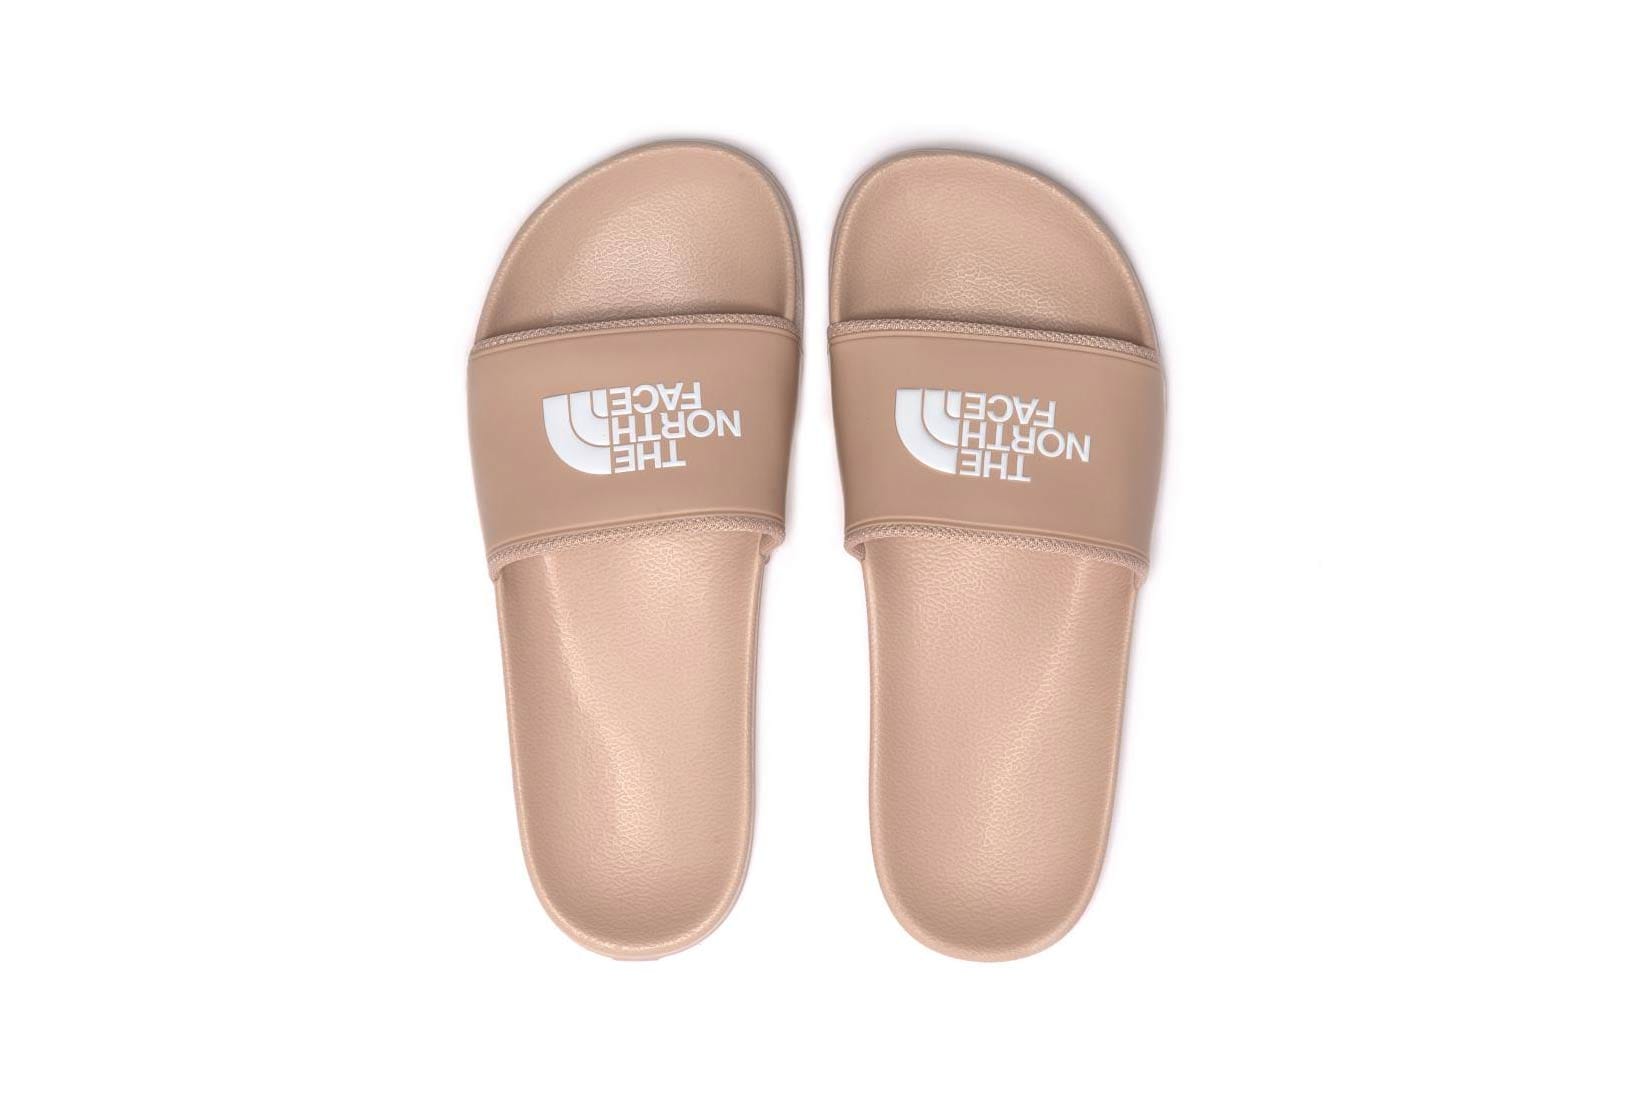 The North Face Slides in 